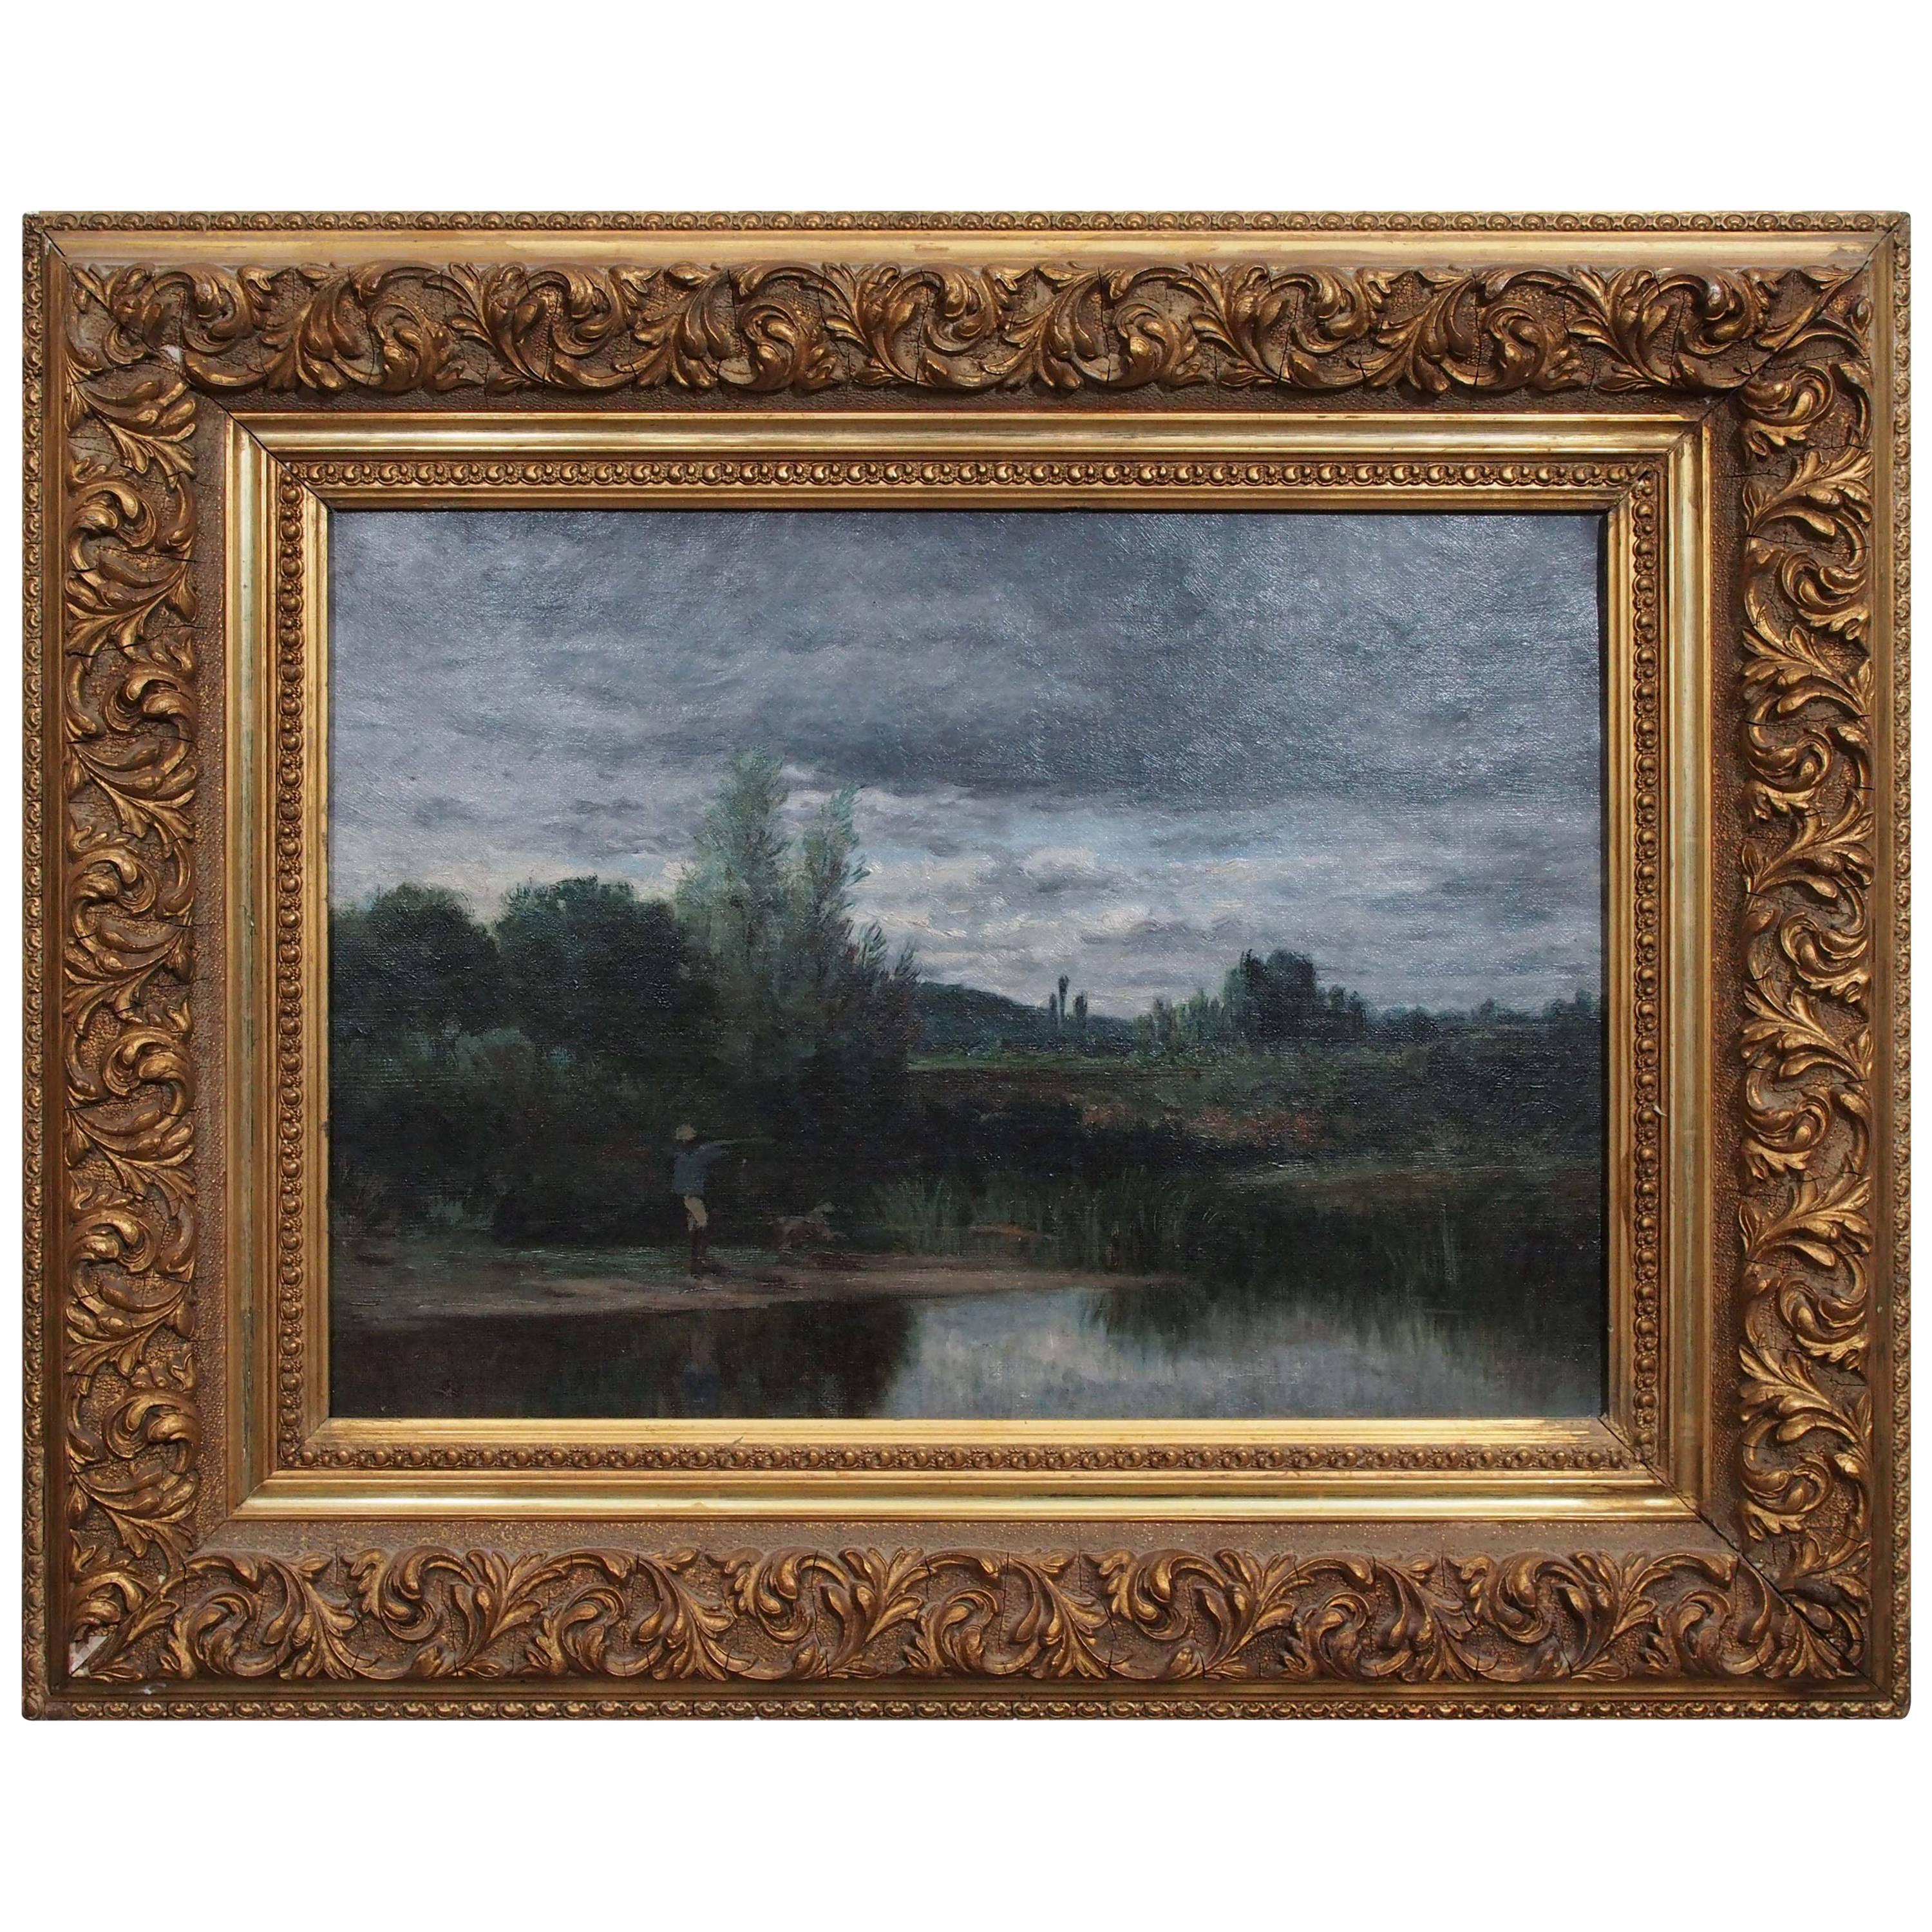 19th Century French Barbizon School Oil on Canvas in Period Frame